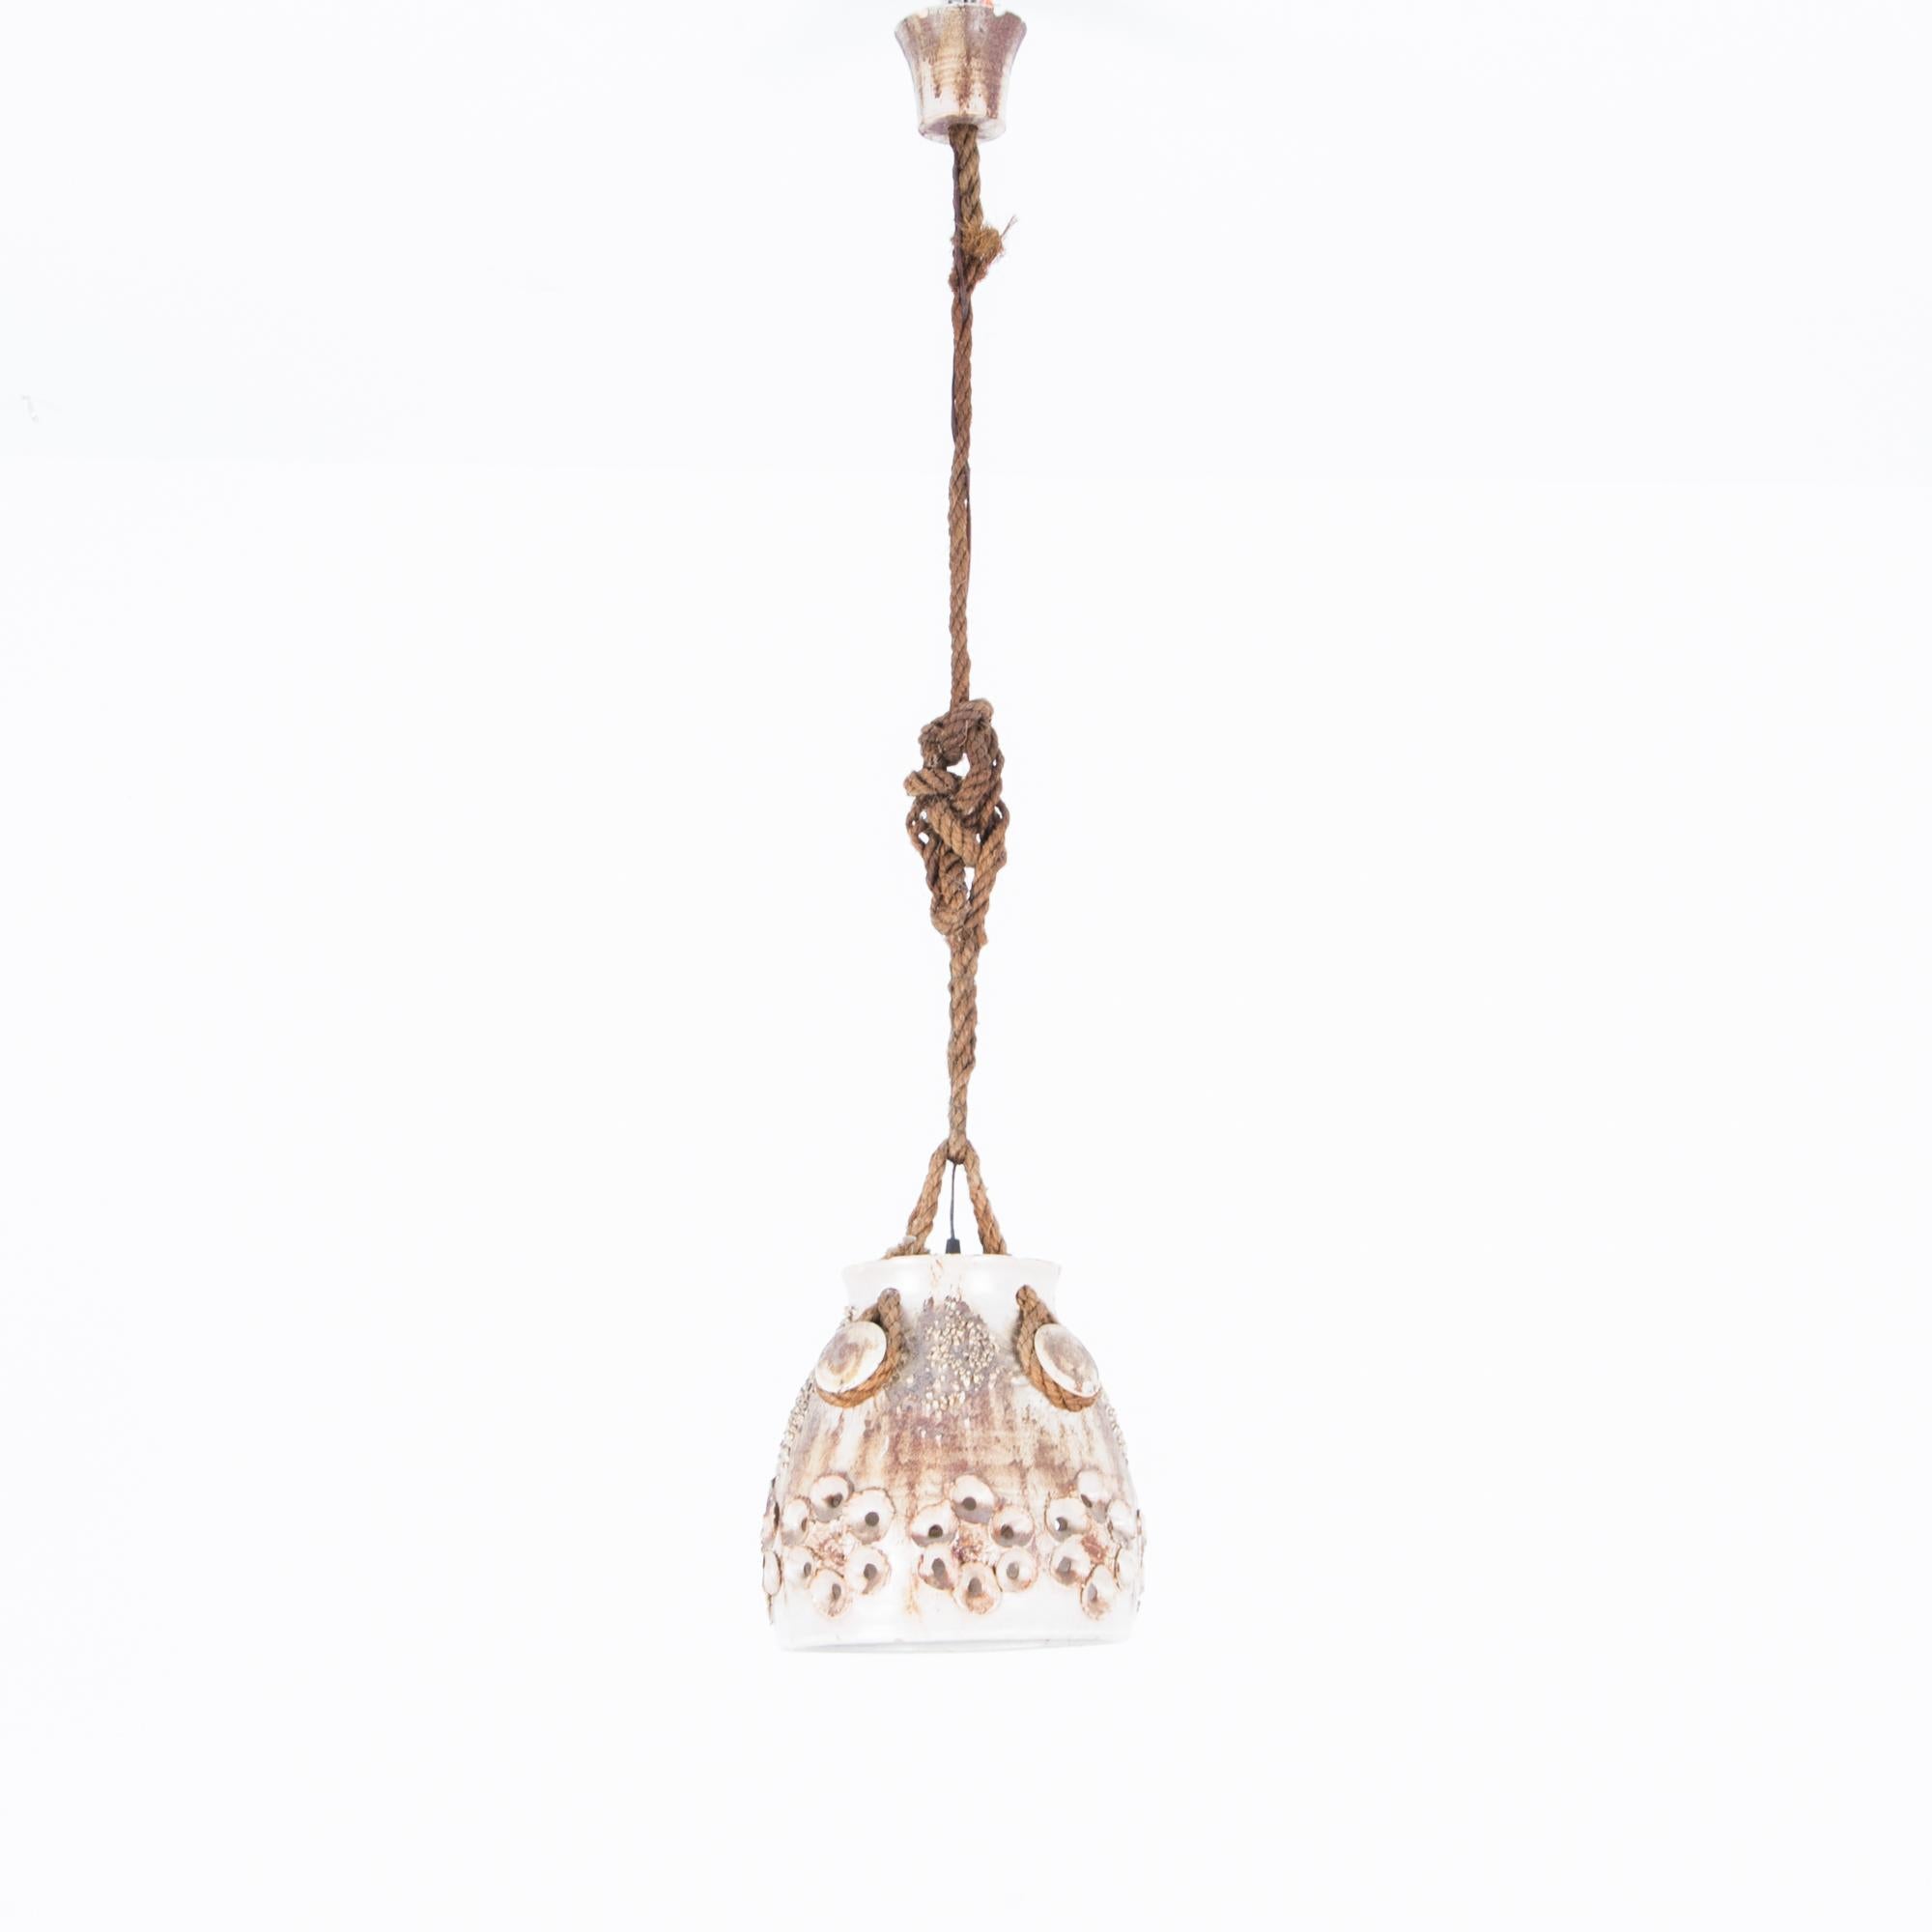 Made in Denmark in the 1960s, this ceramic pendant light has great organic texture. A glazed ceramic light fixture featuring a rustic floral pattern is sustained by a knotted rope, attached to ceramic cleats for a nautical effect. The shell-like